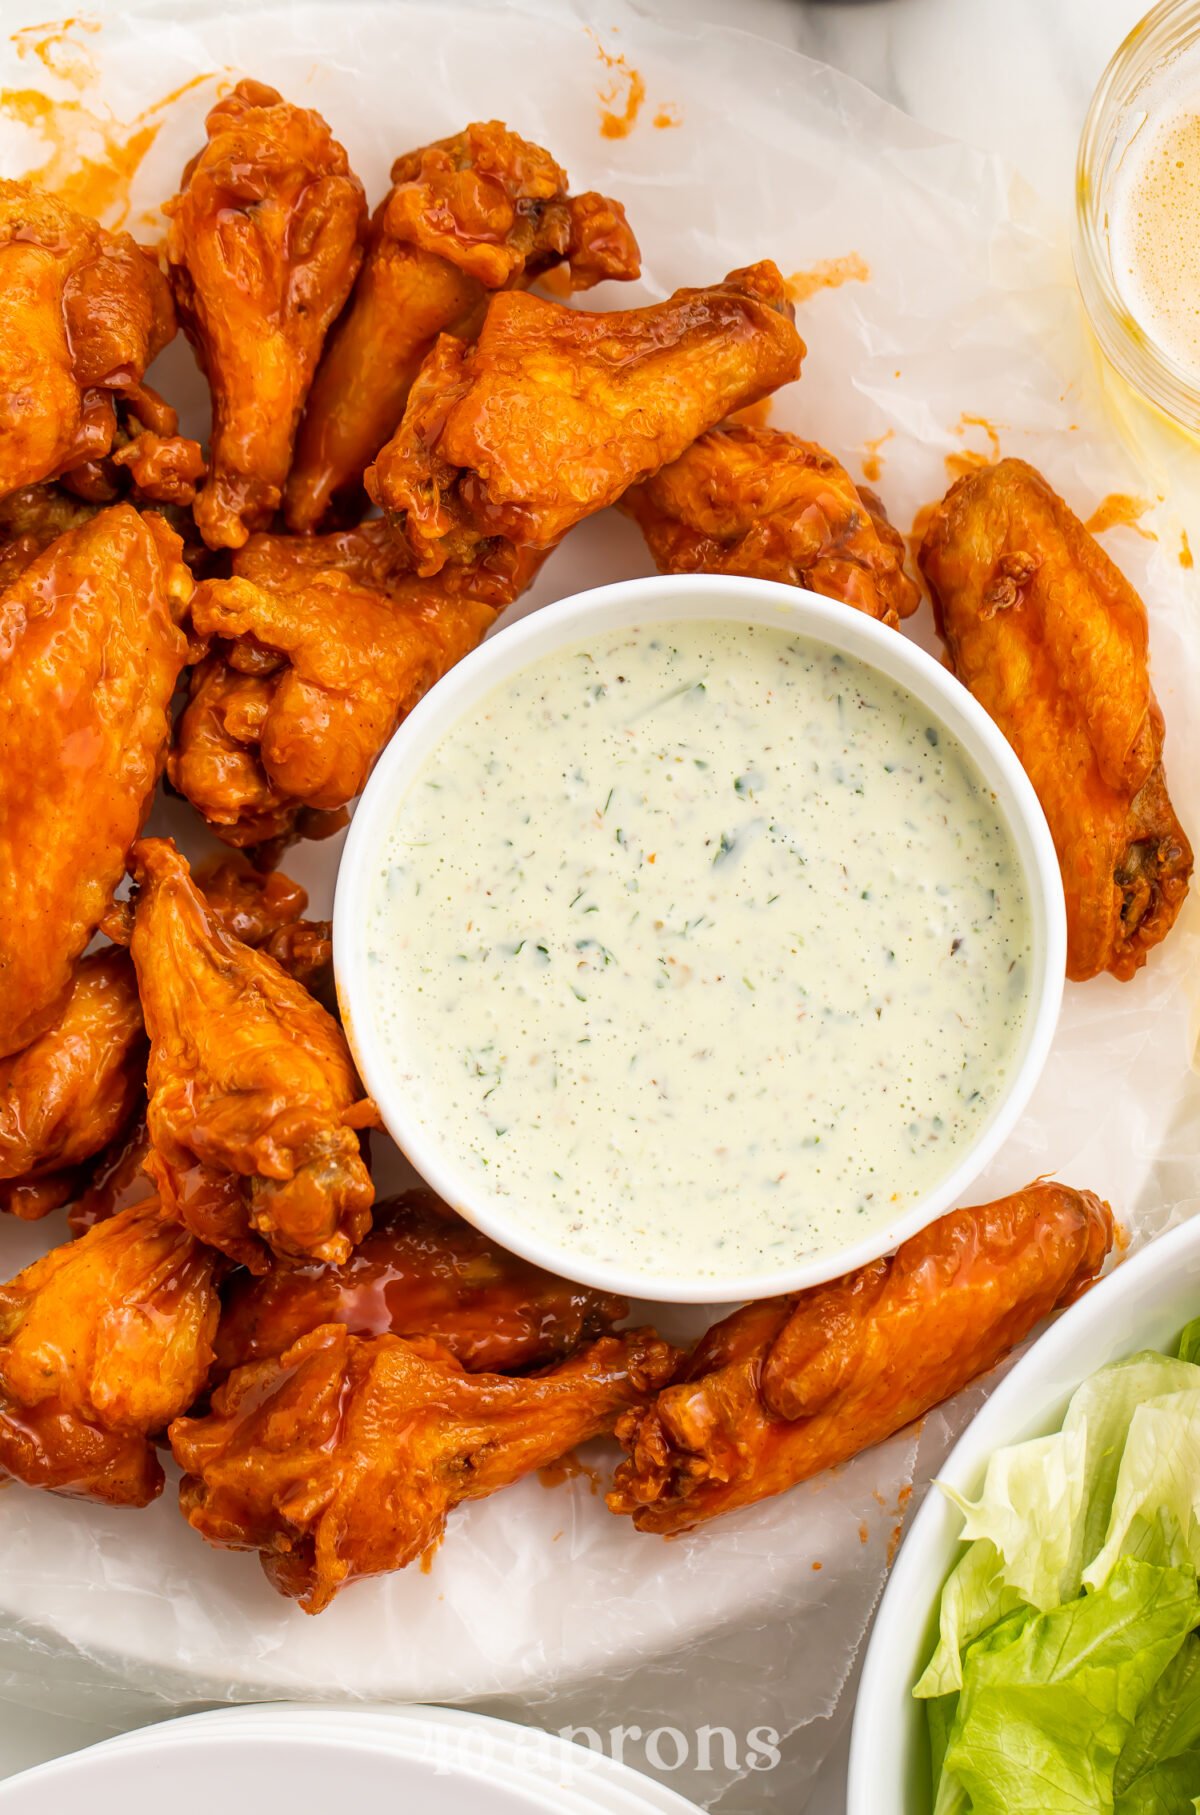 Top-down view of a bowl of chimichurri ranch dressing on a plate with bright orange buffalo chicken wings.